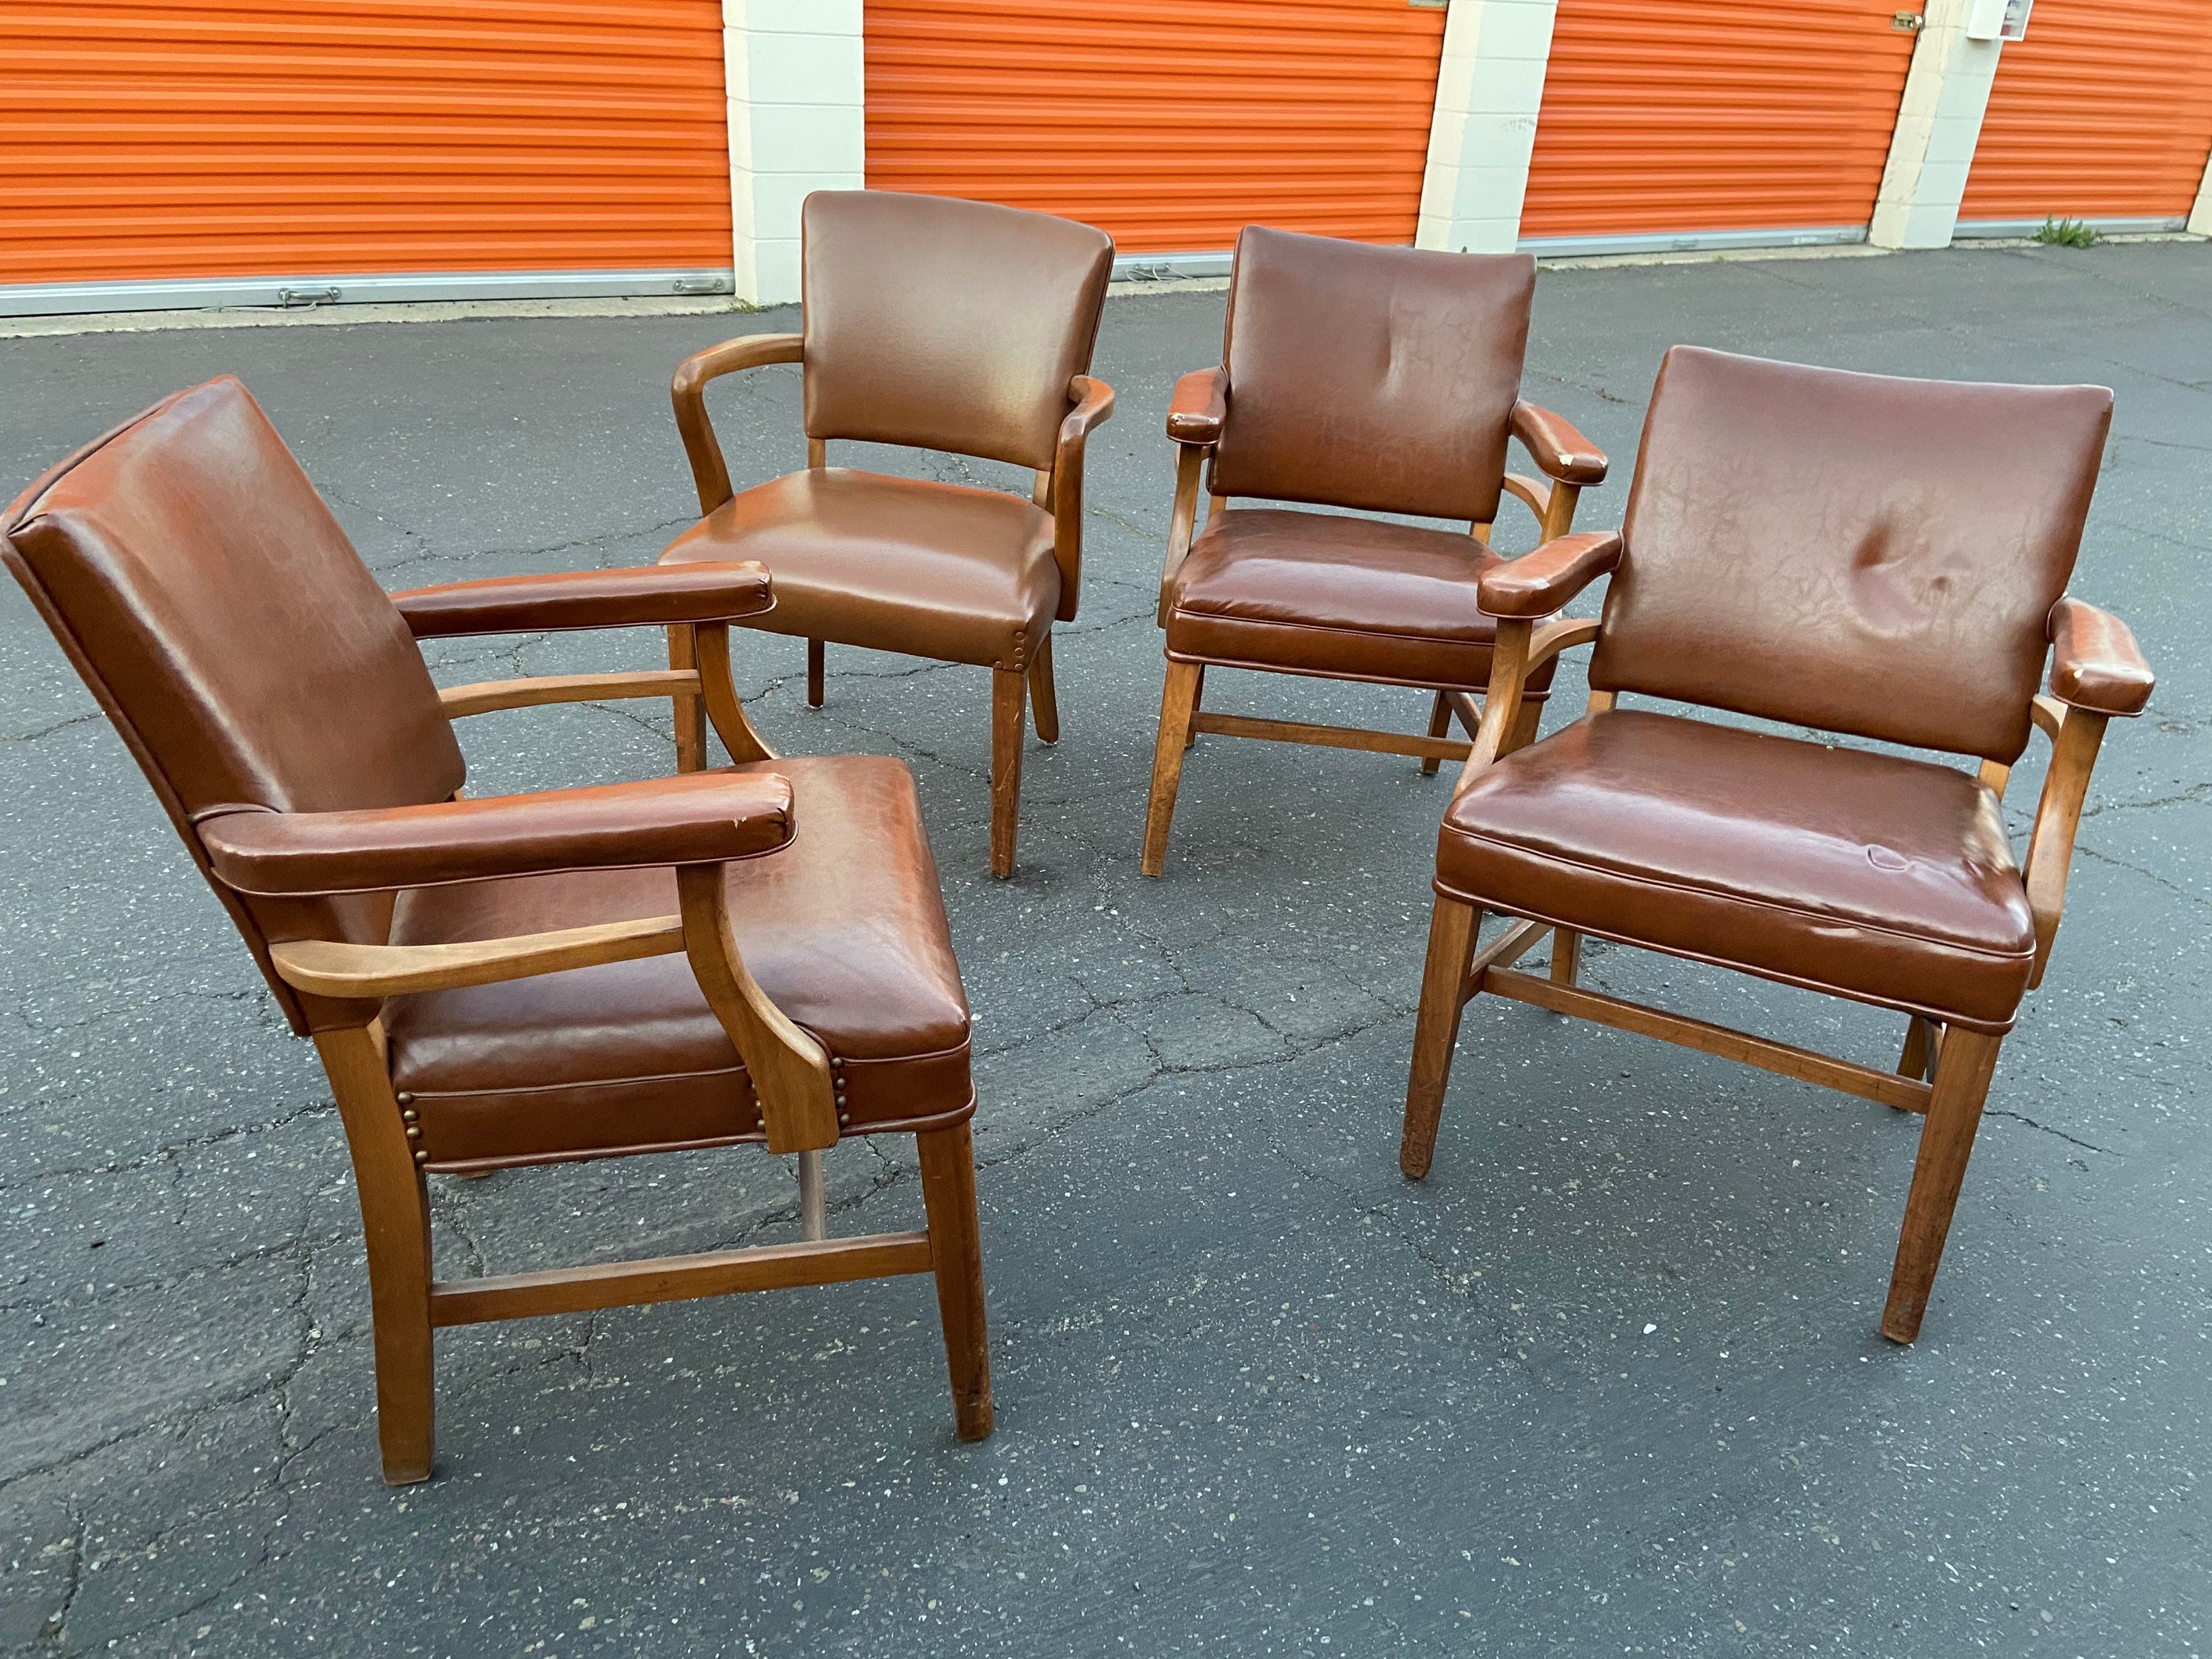 Vintage Used Office Chairs Corinthian Leather